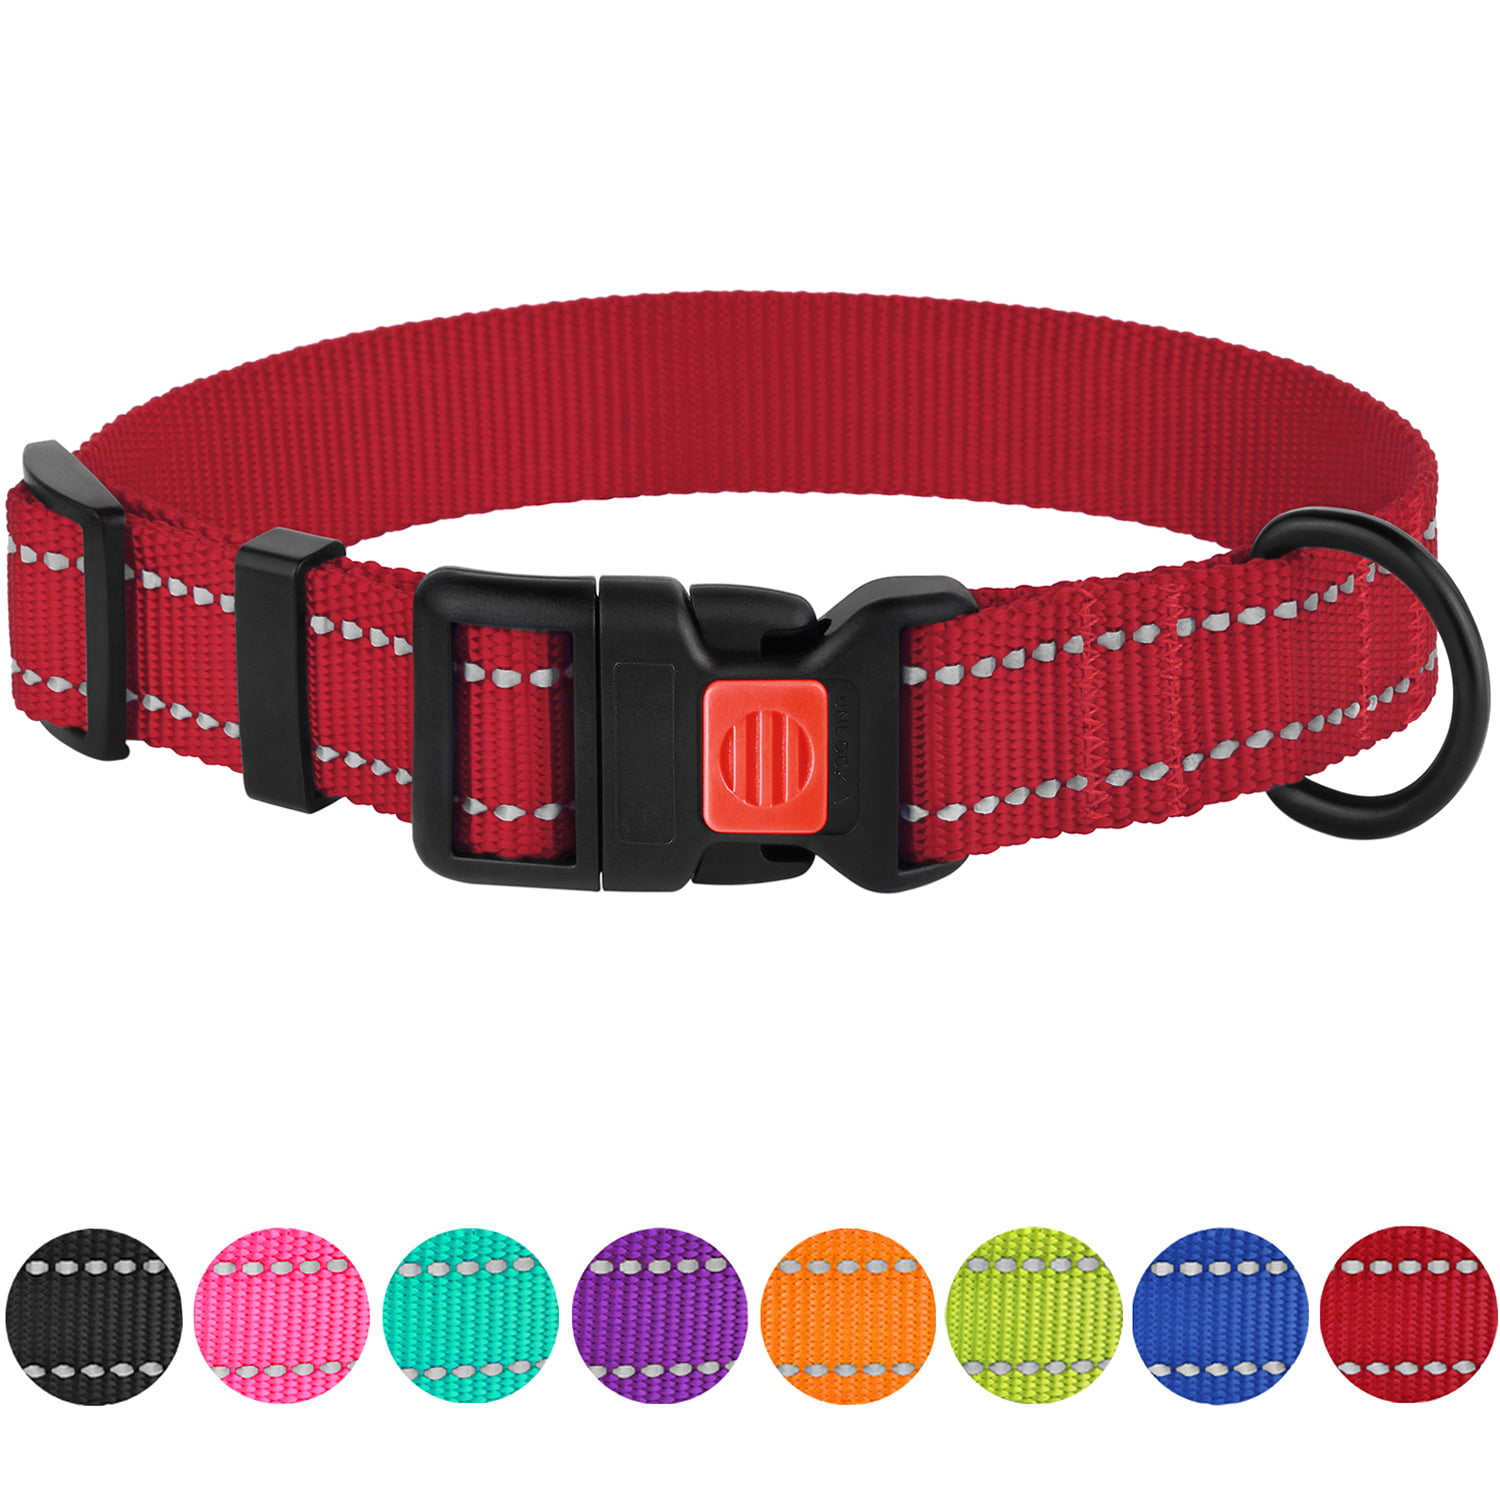 CollarDirect Reflective Dog Collar with Buckle Adjustable Safety Nylon Collars for Dogs Small Medium Large Pink Black Red Blue Purple Green Orange 